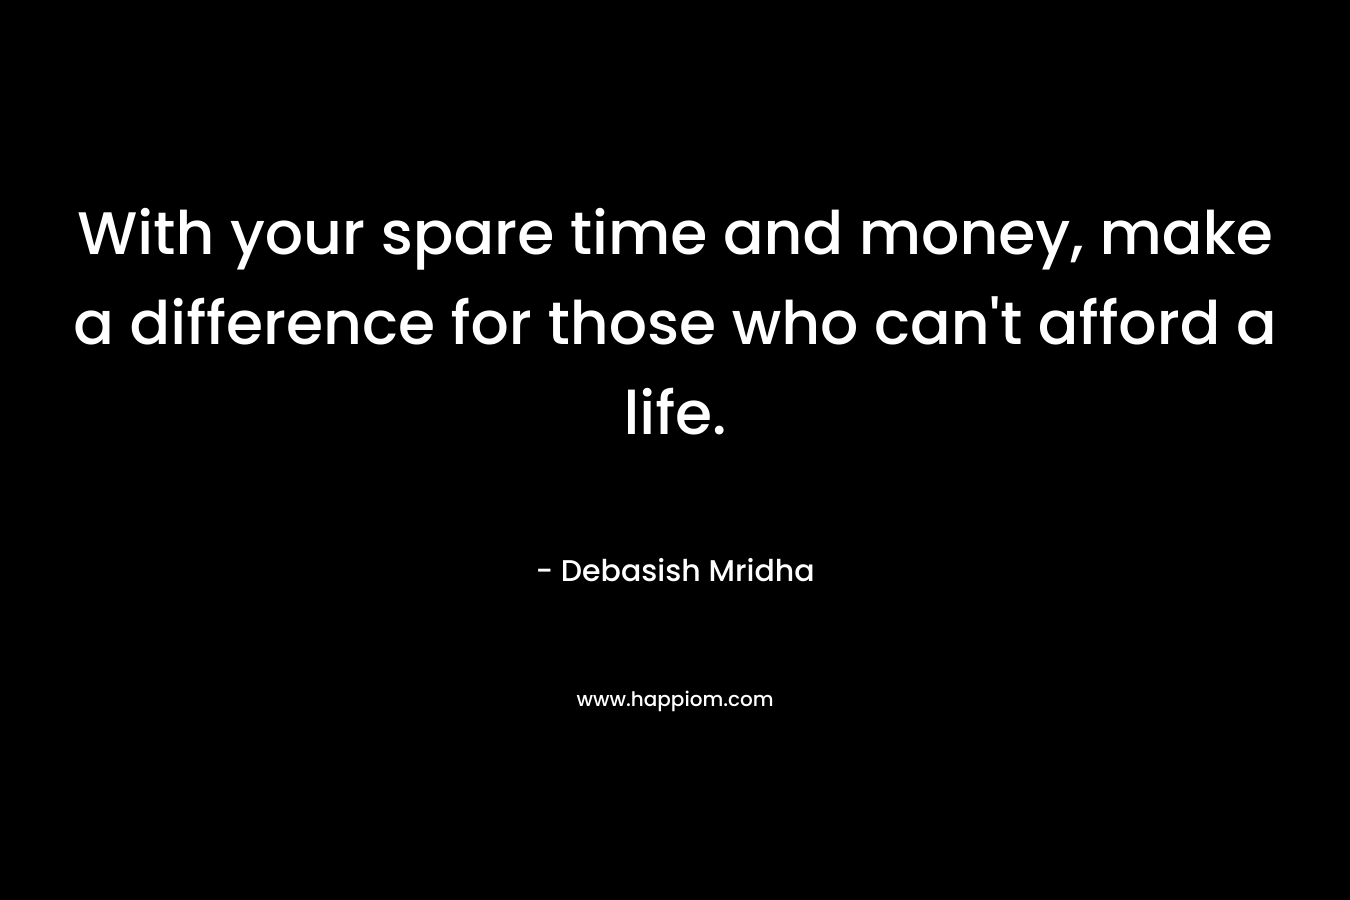 With your spare time and money, make a difference for those who can’t afford a life. – Debasish Mridha